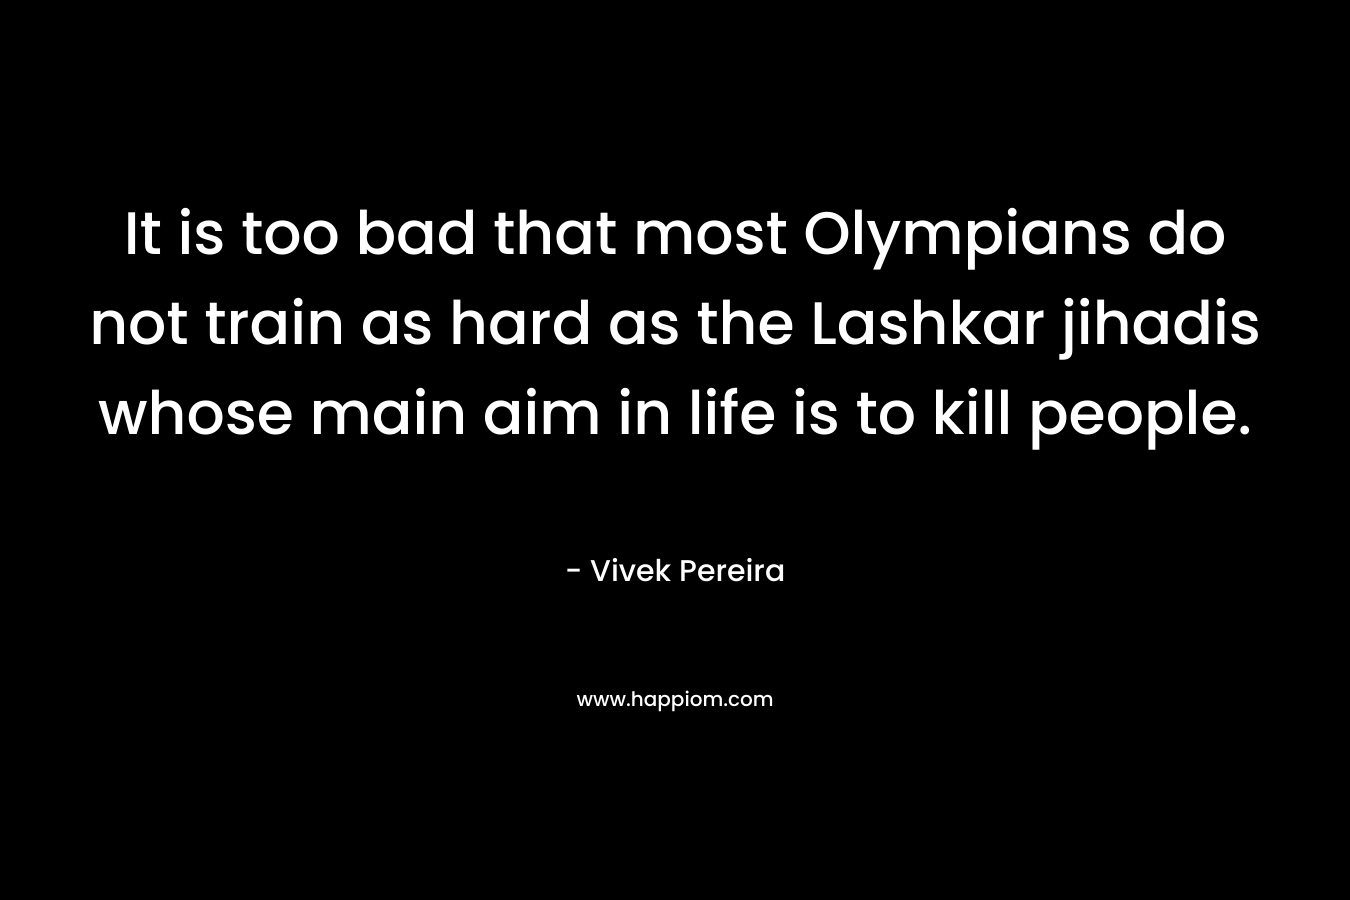 It is too bad that most Olympians do not train as hard as the Lashkar jihadis whose main aim in life is to kill people.